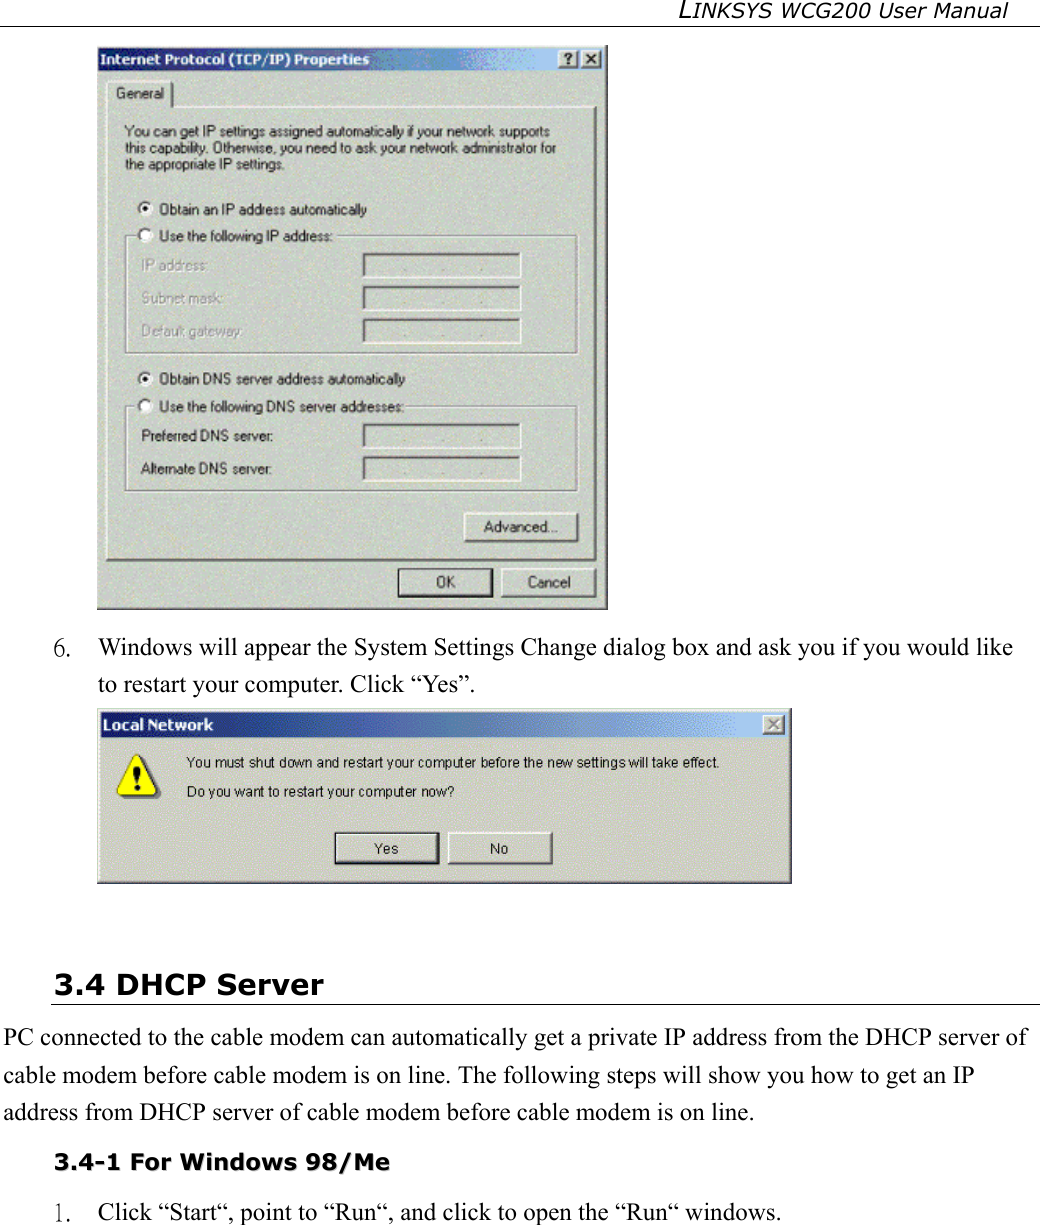 LINKSYS WCG200 User Manual    6.  Windows will appear the System Settings Change dialog box and ask you if you would like to restart your computer. Click “Yes”.   3.4 DHCP Server PC connected to the cable modem can automatically get a private IP address from the DHCP server of cable modem before cable modem is on line. The following steps will show you how to get an IP address from DHCP server of cable modem before cable modem is on line. 33..44--11  FFoorr  WWiinnddoowwss  9988//MMee  1.  Click “Start“, point to “Run“, and click to open the “Run“ windows. 